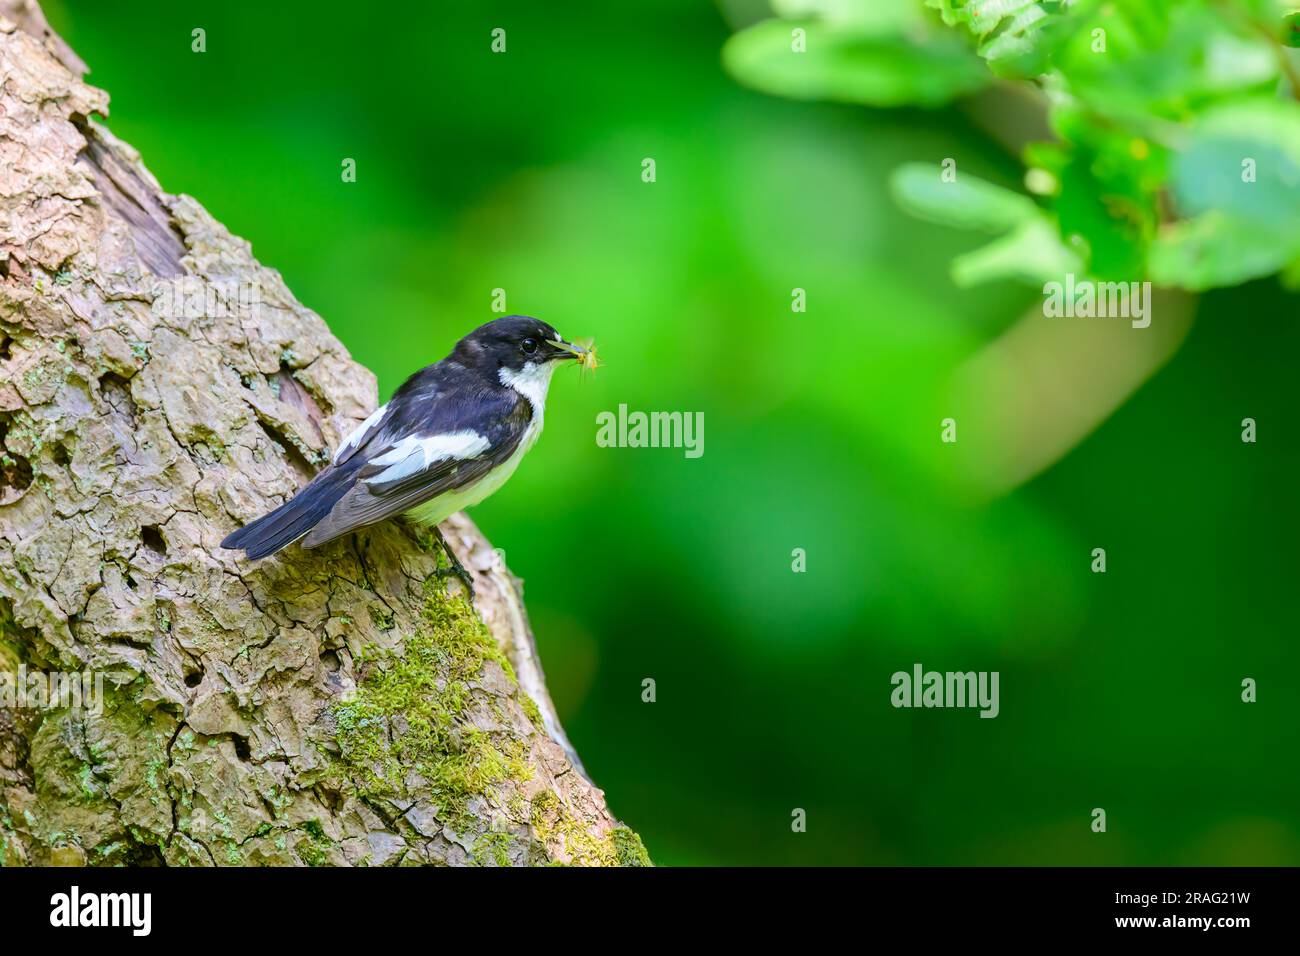 Male Pied Flycatcher, Ficedula hypoleuca, perched on a tree trunk with food. Stock Photo